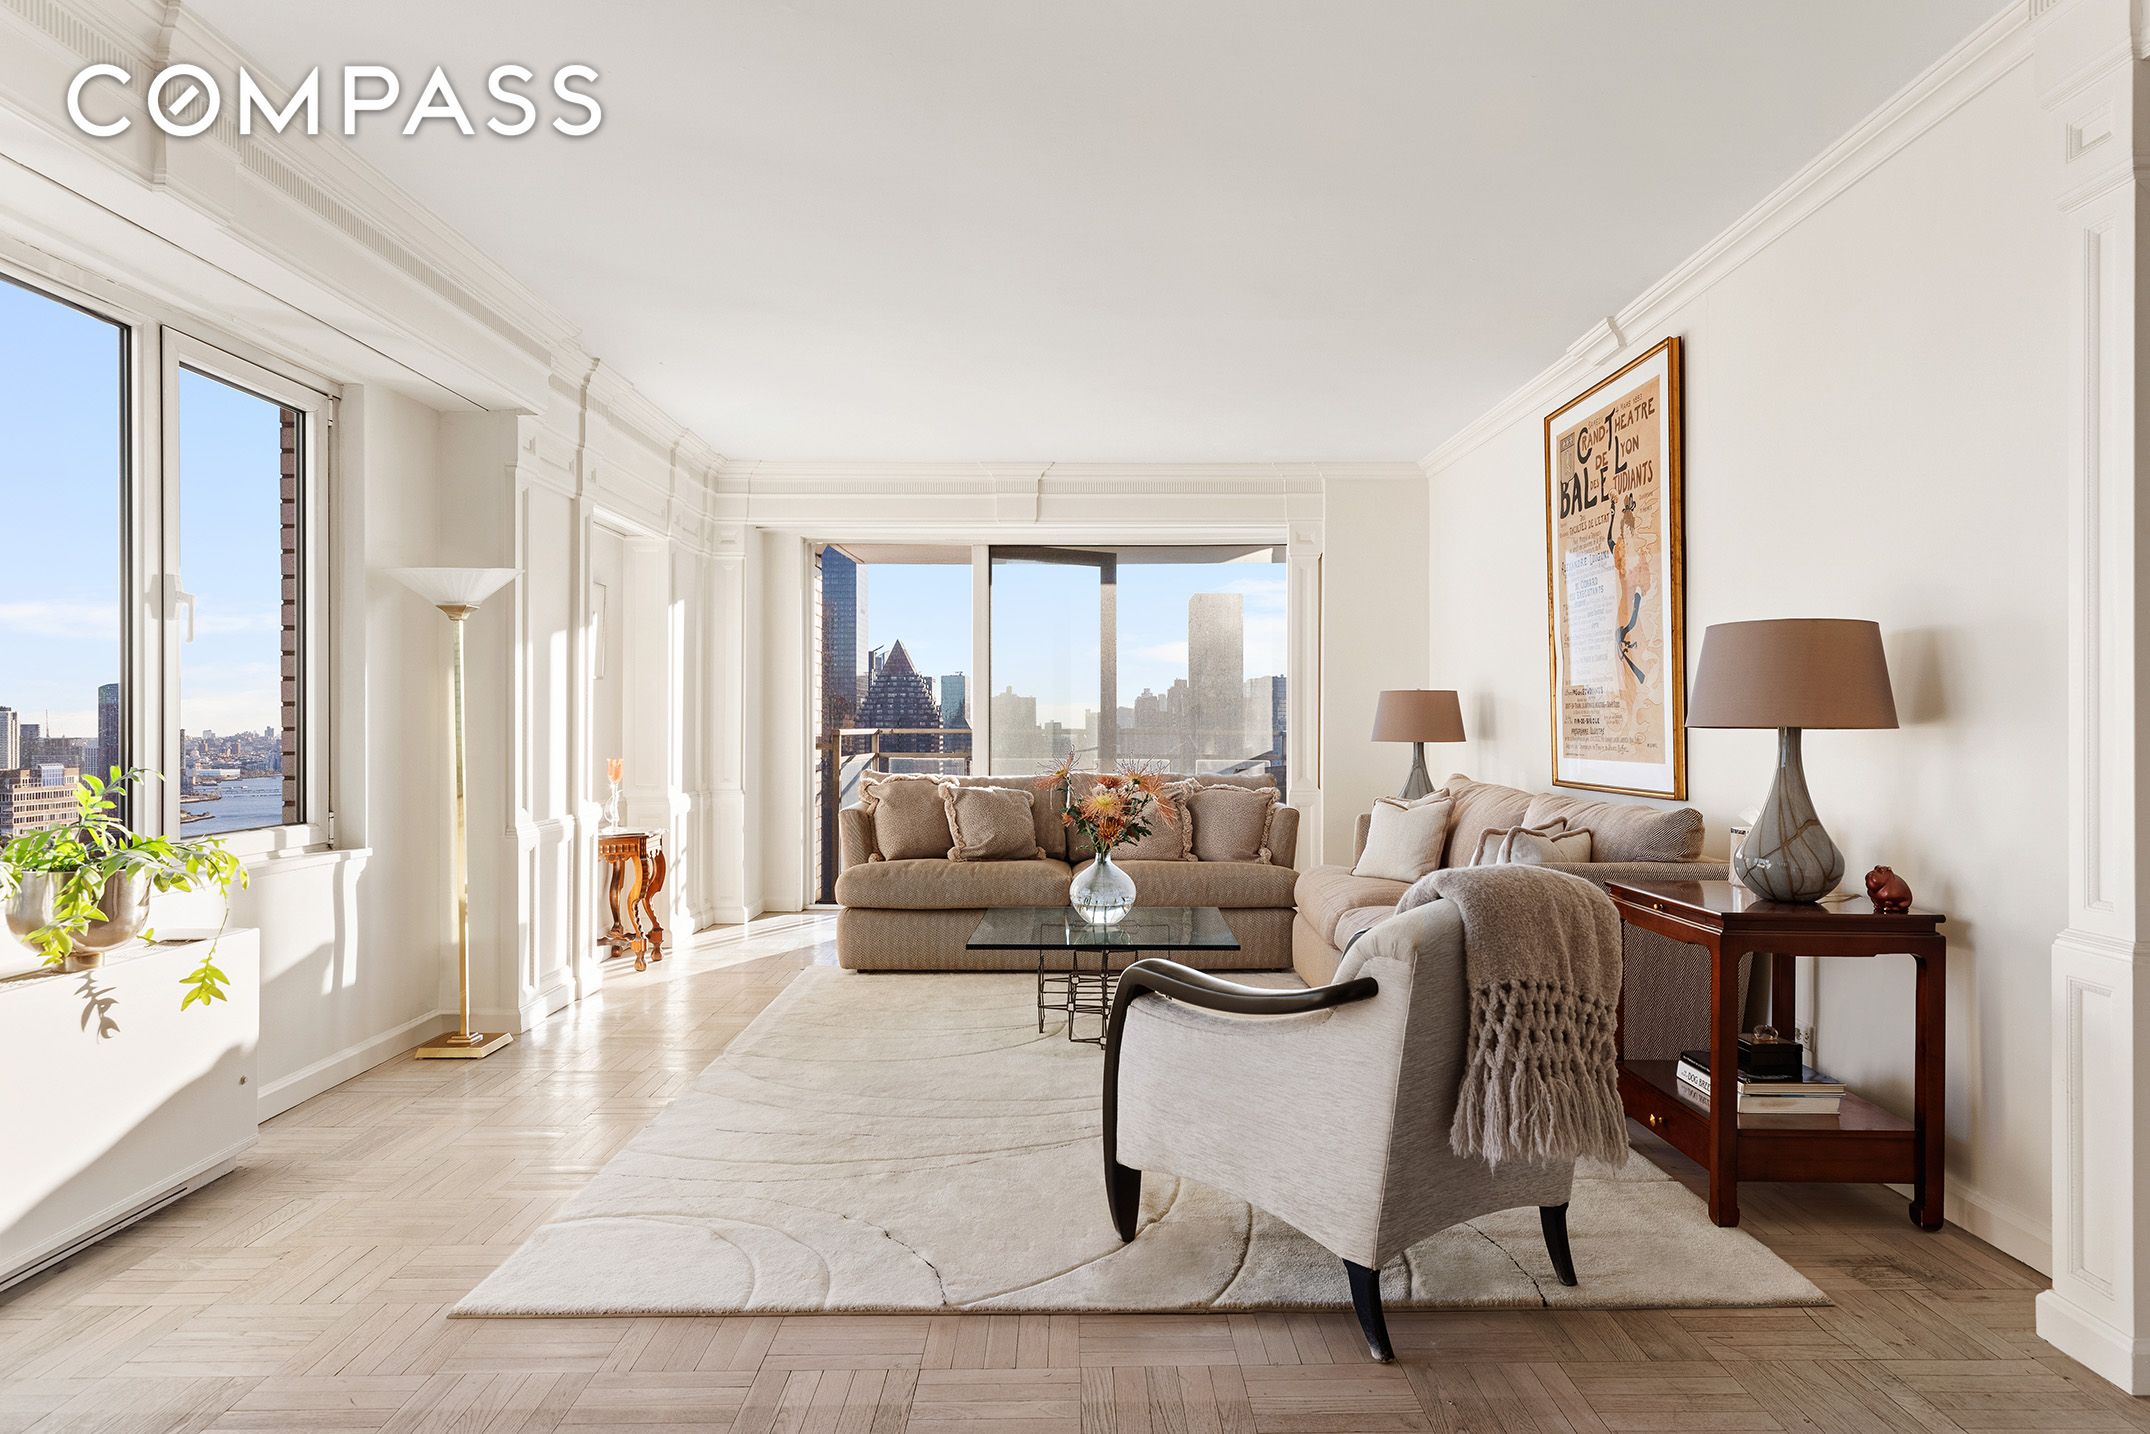 303 East 57th Street 39A, Sutton Place, Midtown East, NYC - 3 Bedrooms  
2.5 Bathrooms  
6 Rooms - 